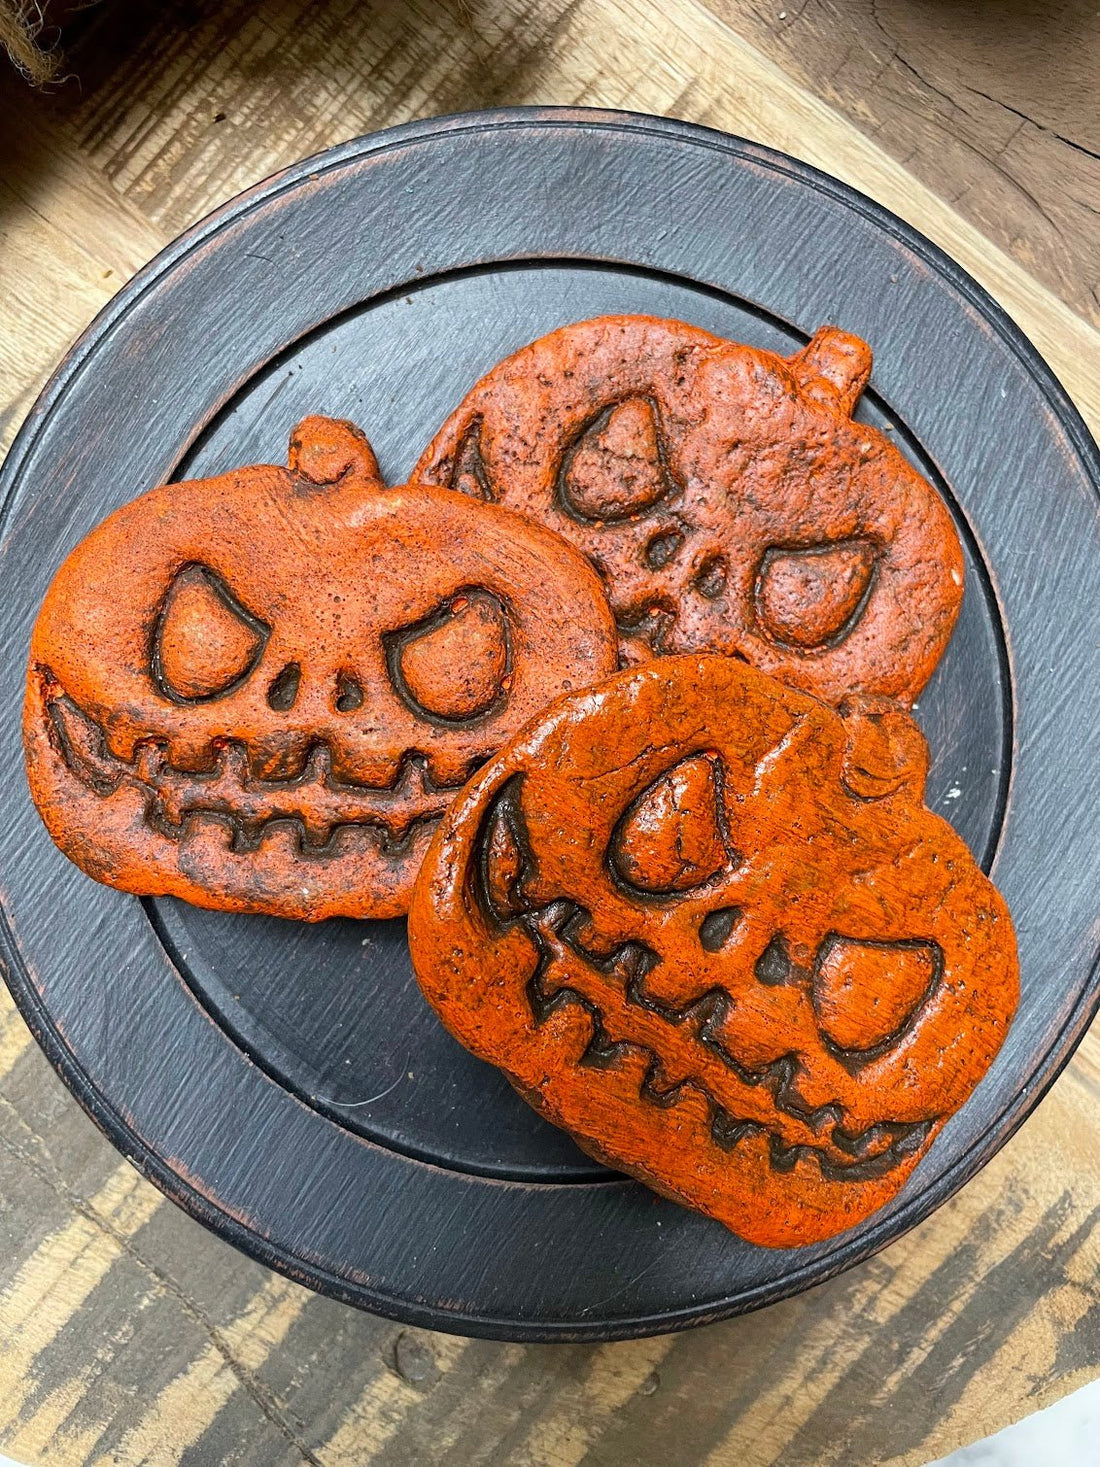 Primitive Halloween 3” Handmade Scary Jack O Lantern Cookie Bowl Fillers - The Primitive Pineapple Collection